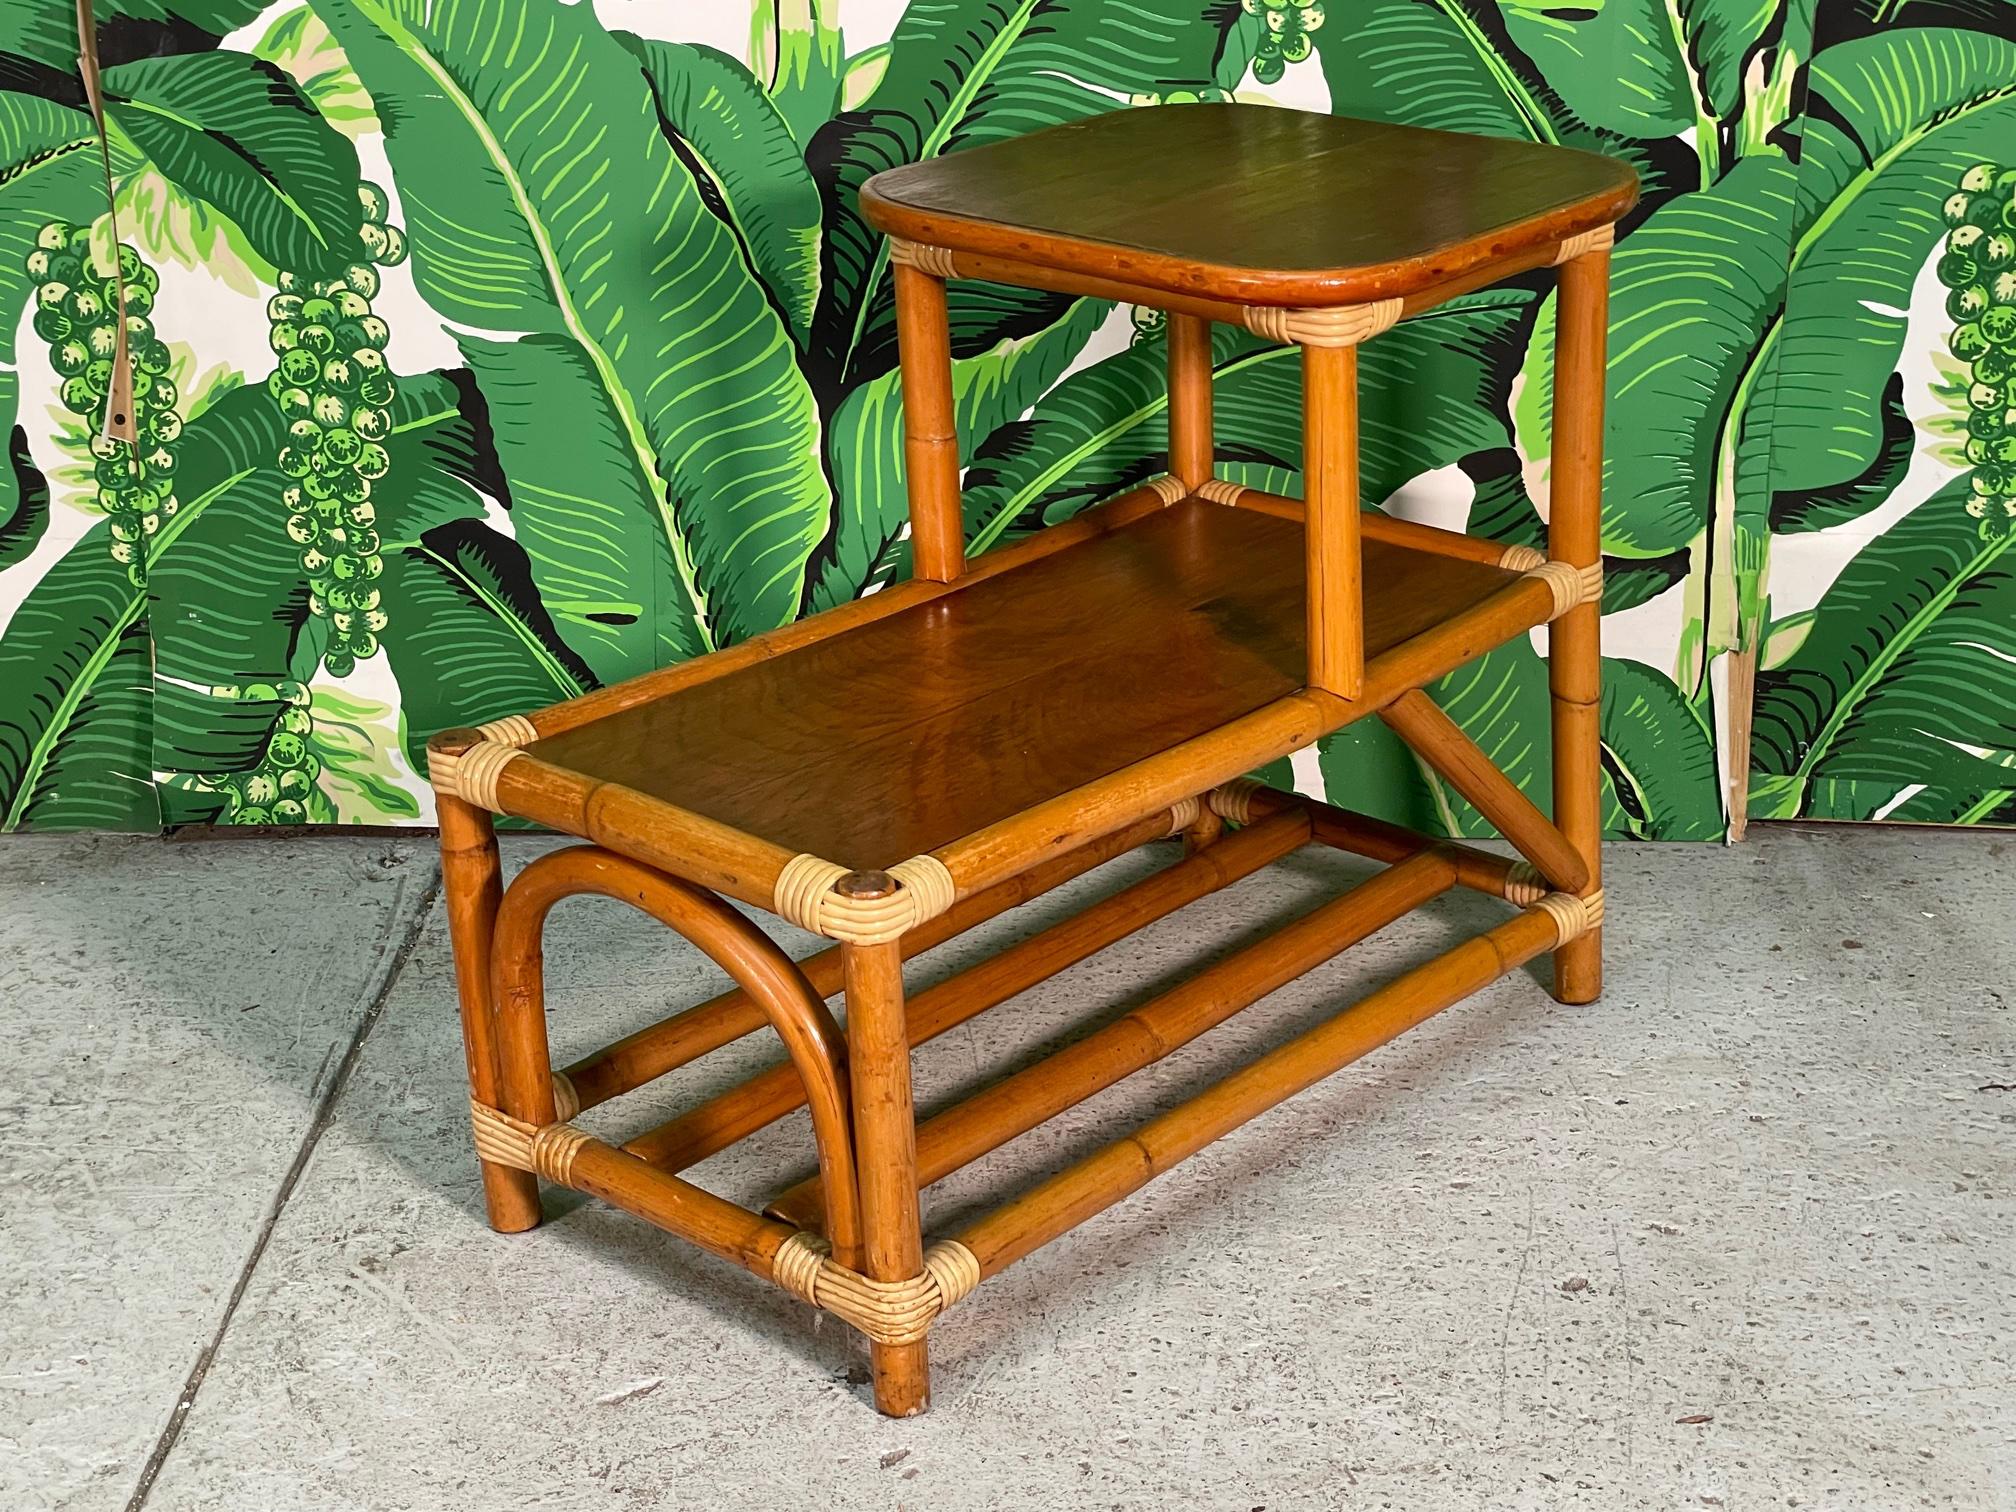 Midcentury Rattan two-tiered side table features mohagany tops and contrasting strapping. Horizontal poles between stretchers form lower shelf. Good condition with minor imperfections consistent with age. May exhibit scuffs, marks, or wear, see